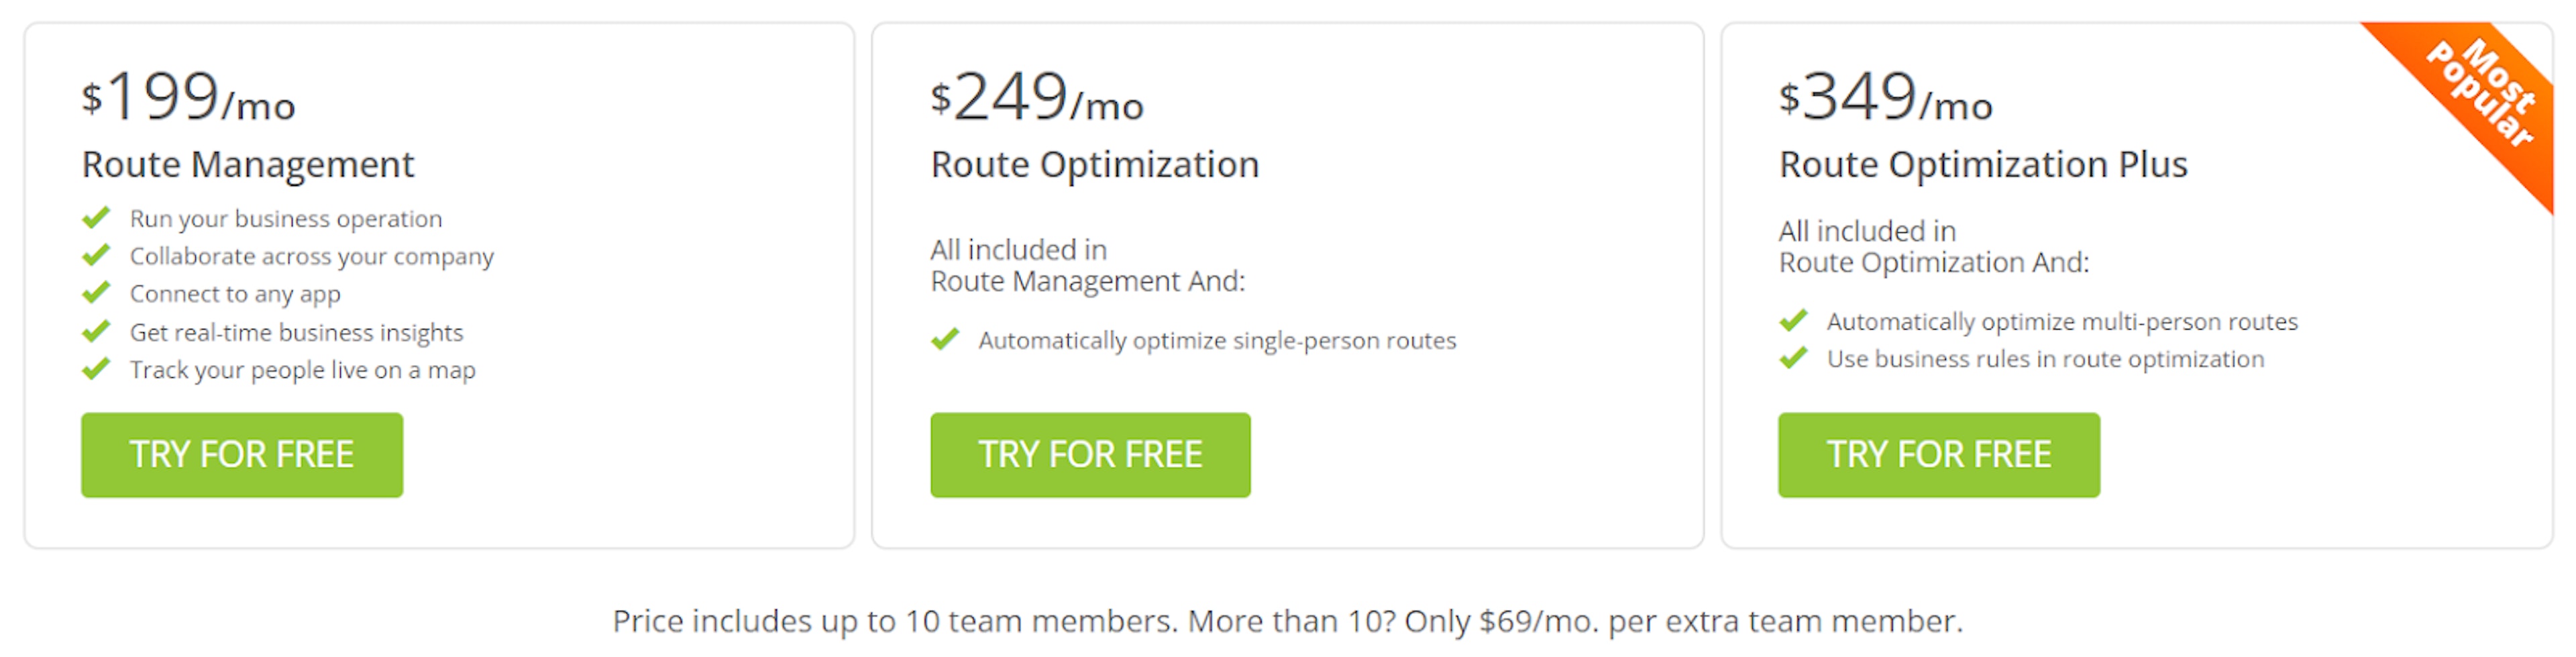 route4me pricing